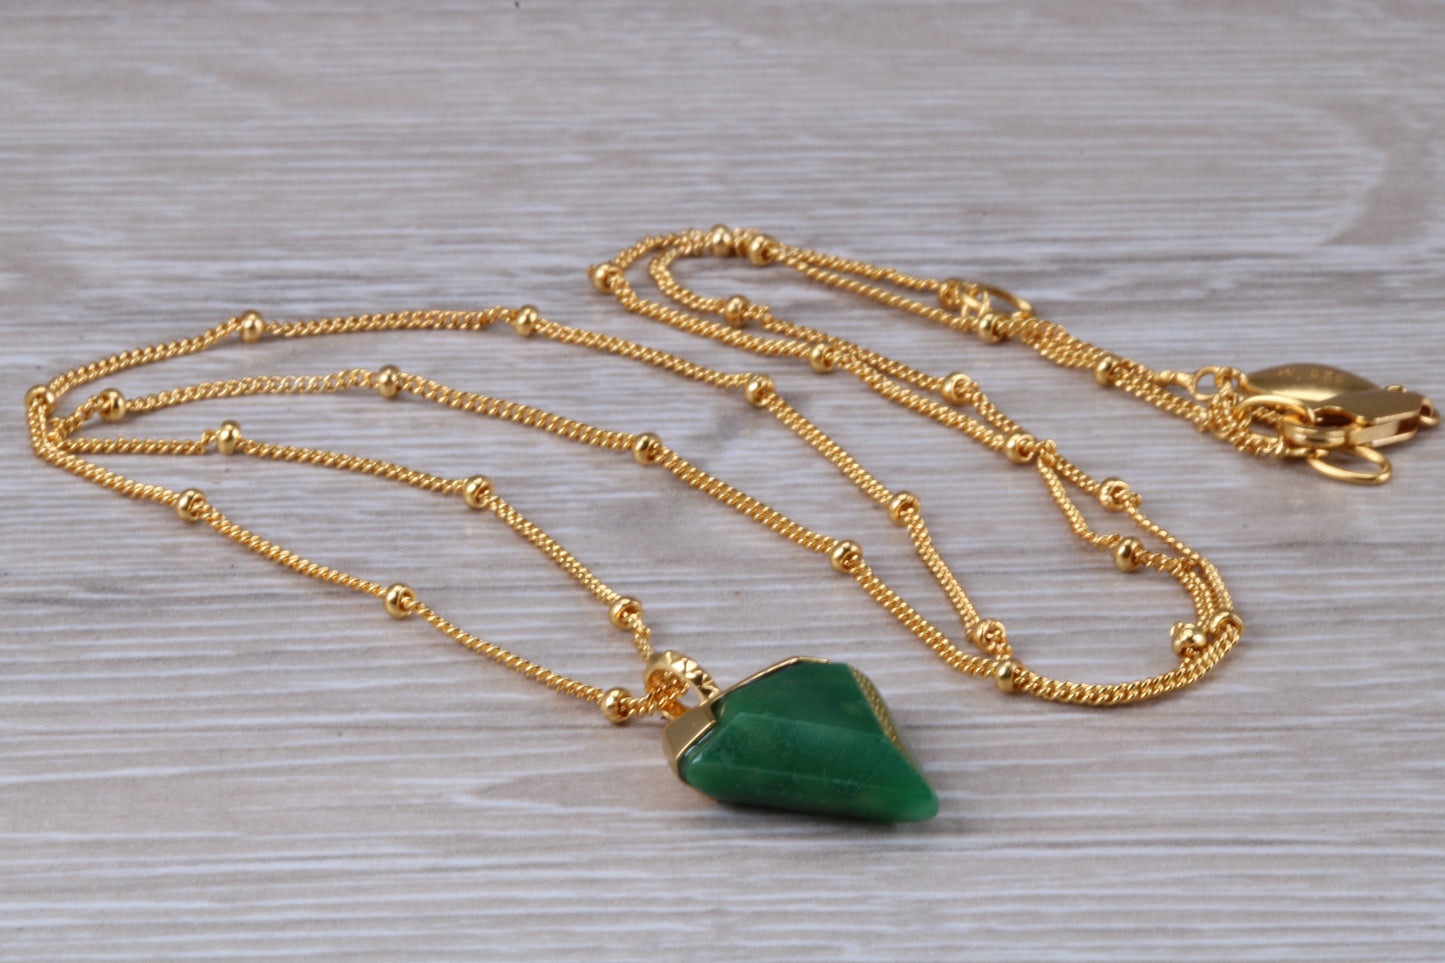 Real Emerald Necklace set in Sterling Silver